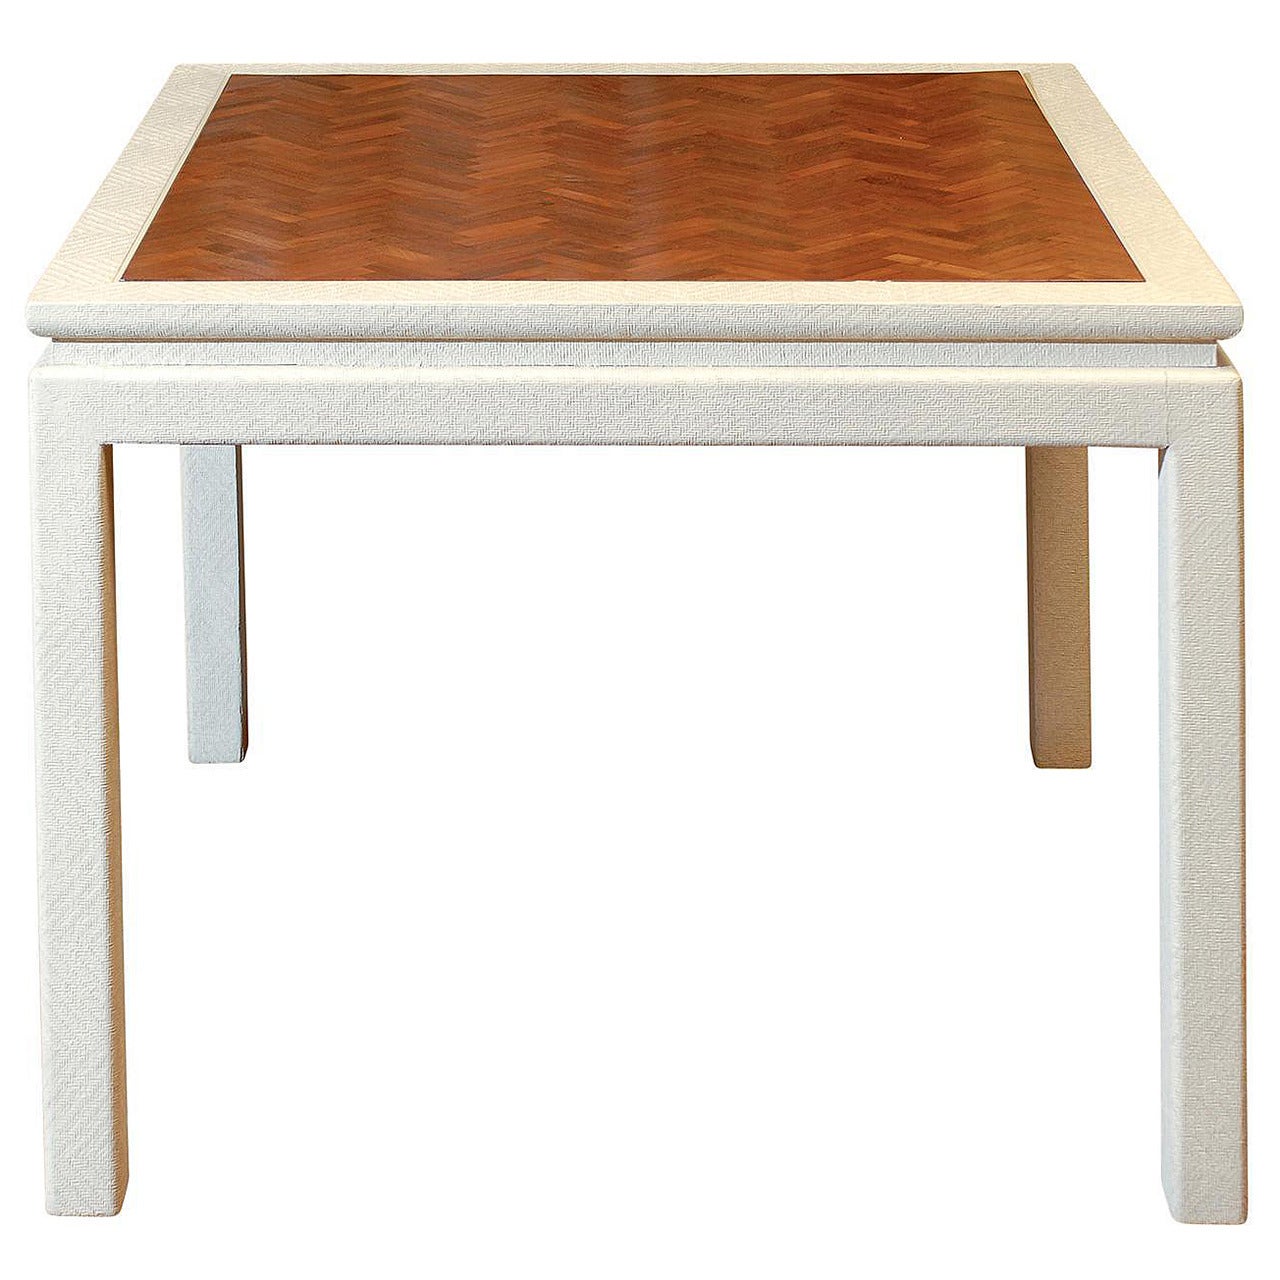 Outstanding Cream Raffia Game Table with Walnut Parquet Top